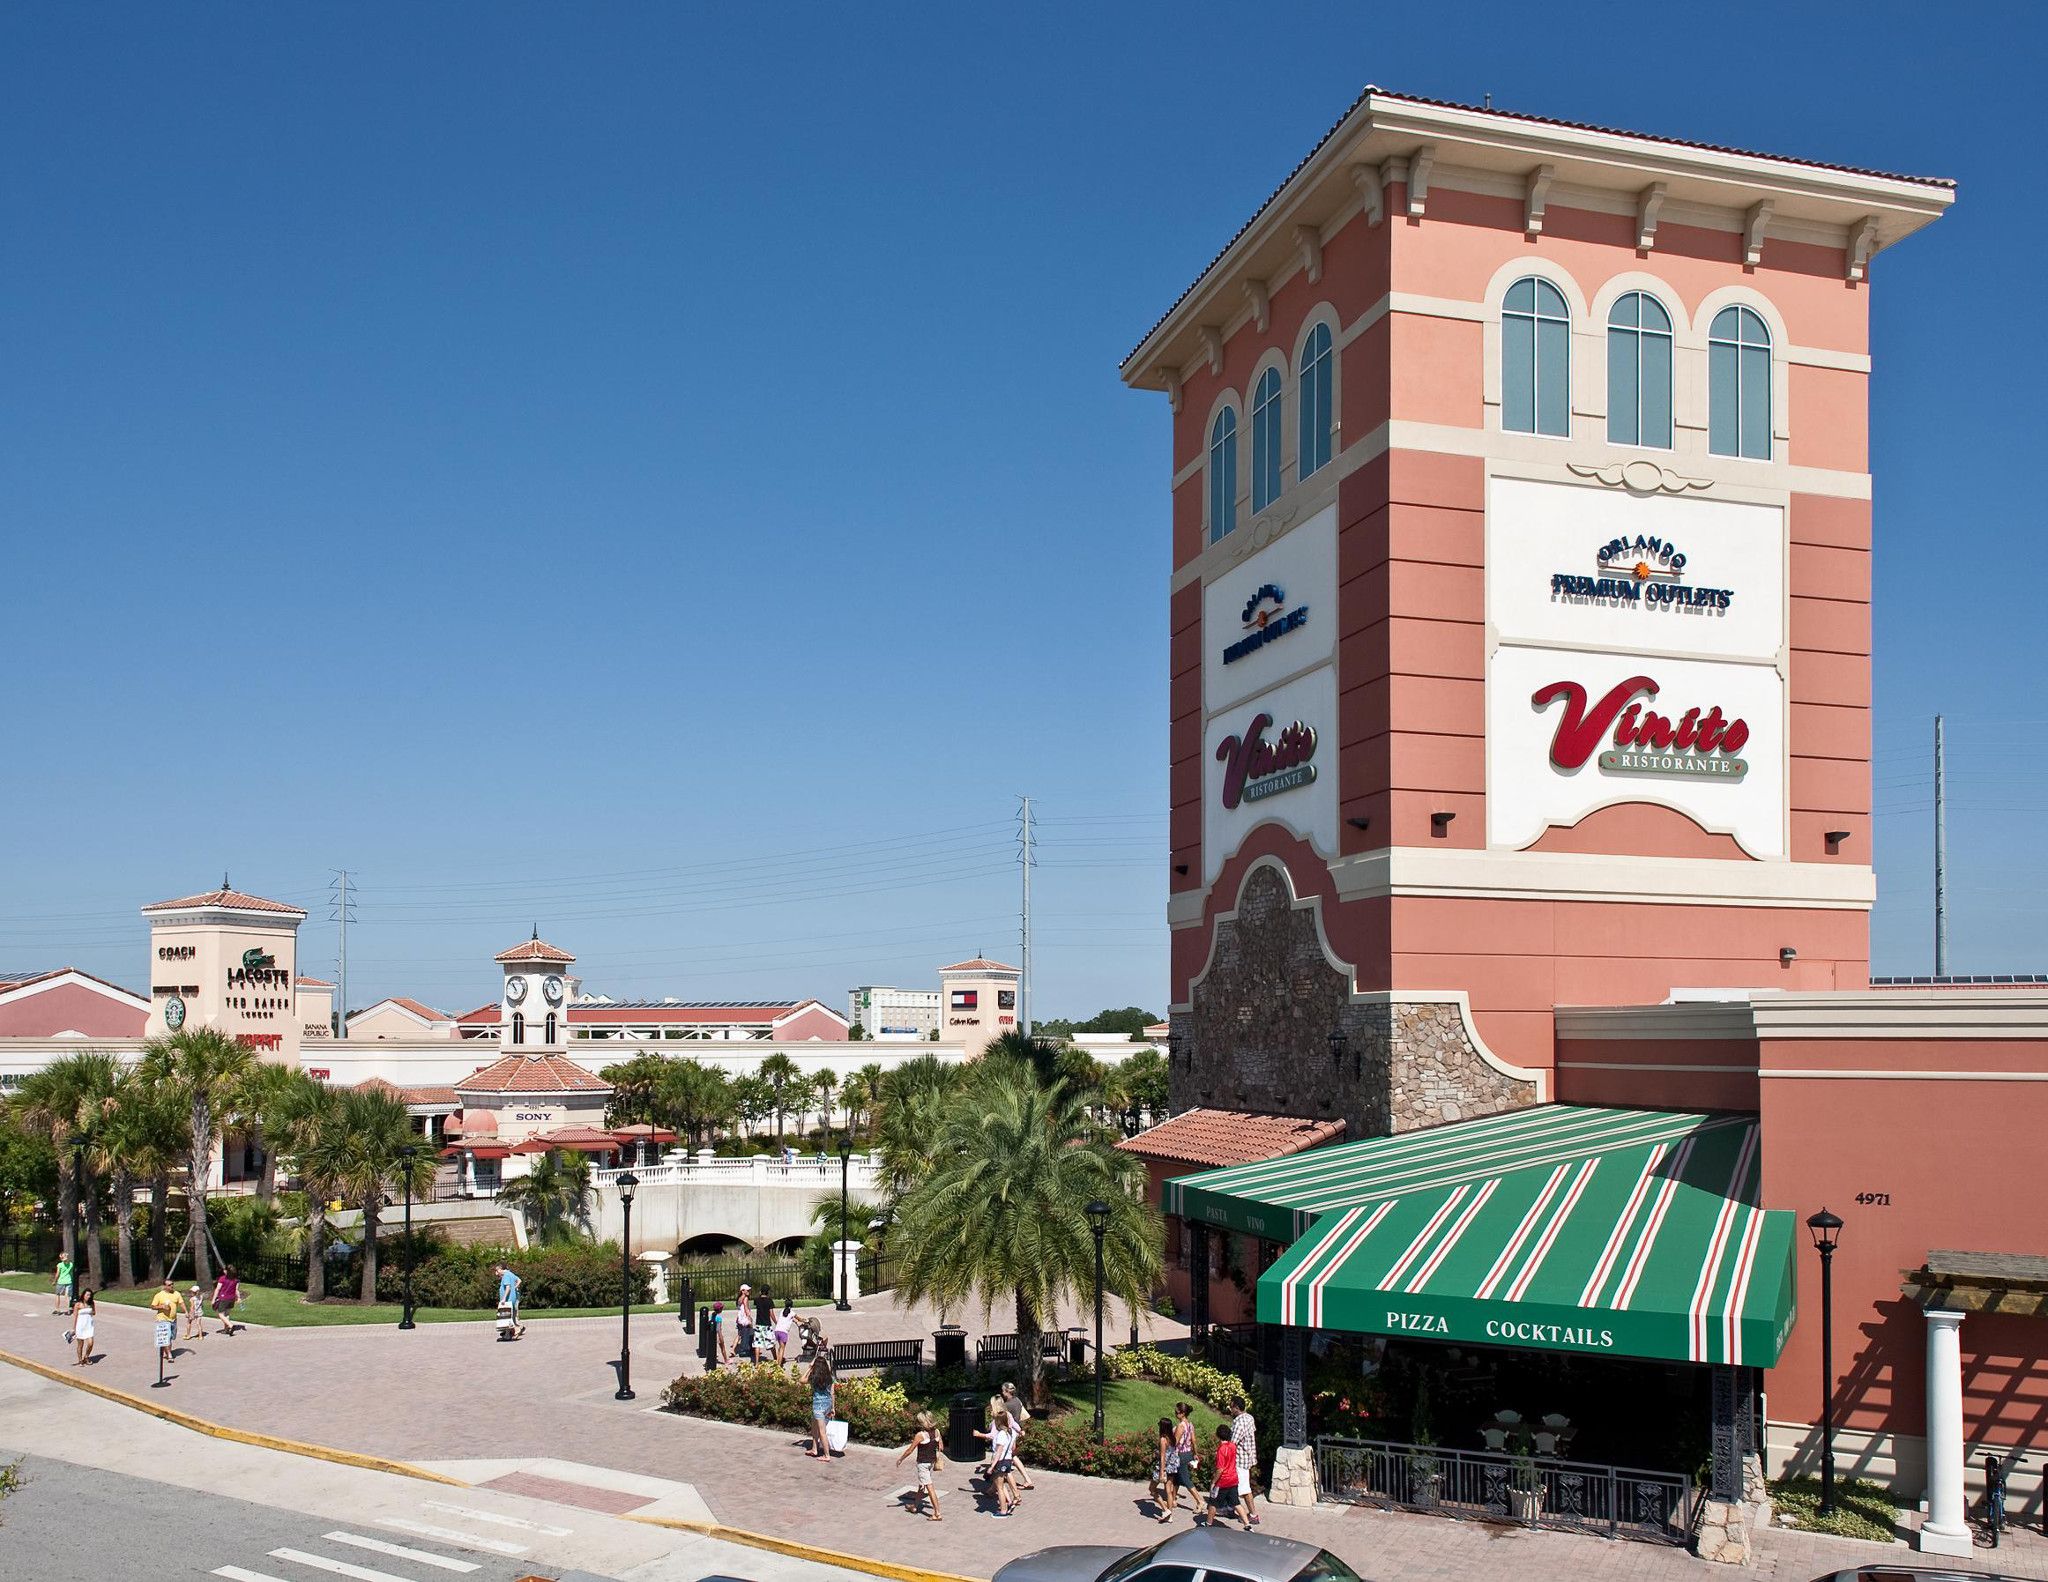 Luxury brand Coach will open a Disney Springs location this Fall - Inside  the Magic